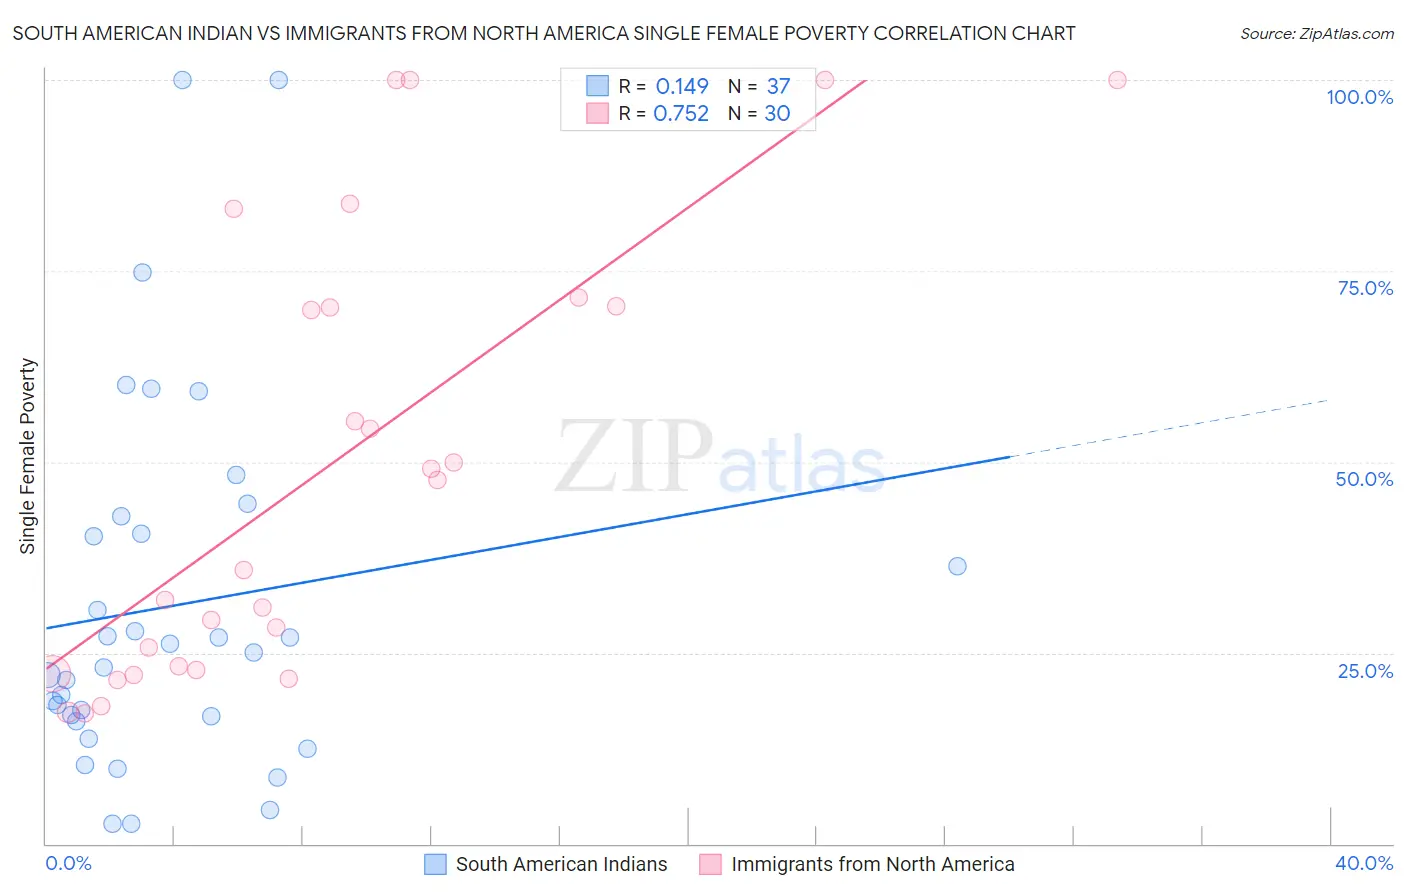 South American Indian vs Immigrants from North America Single Female Poverty